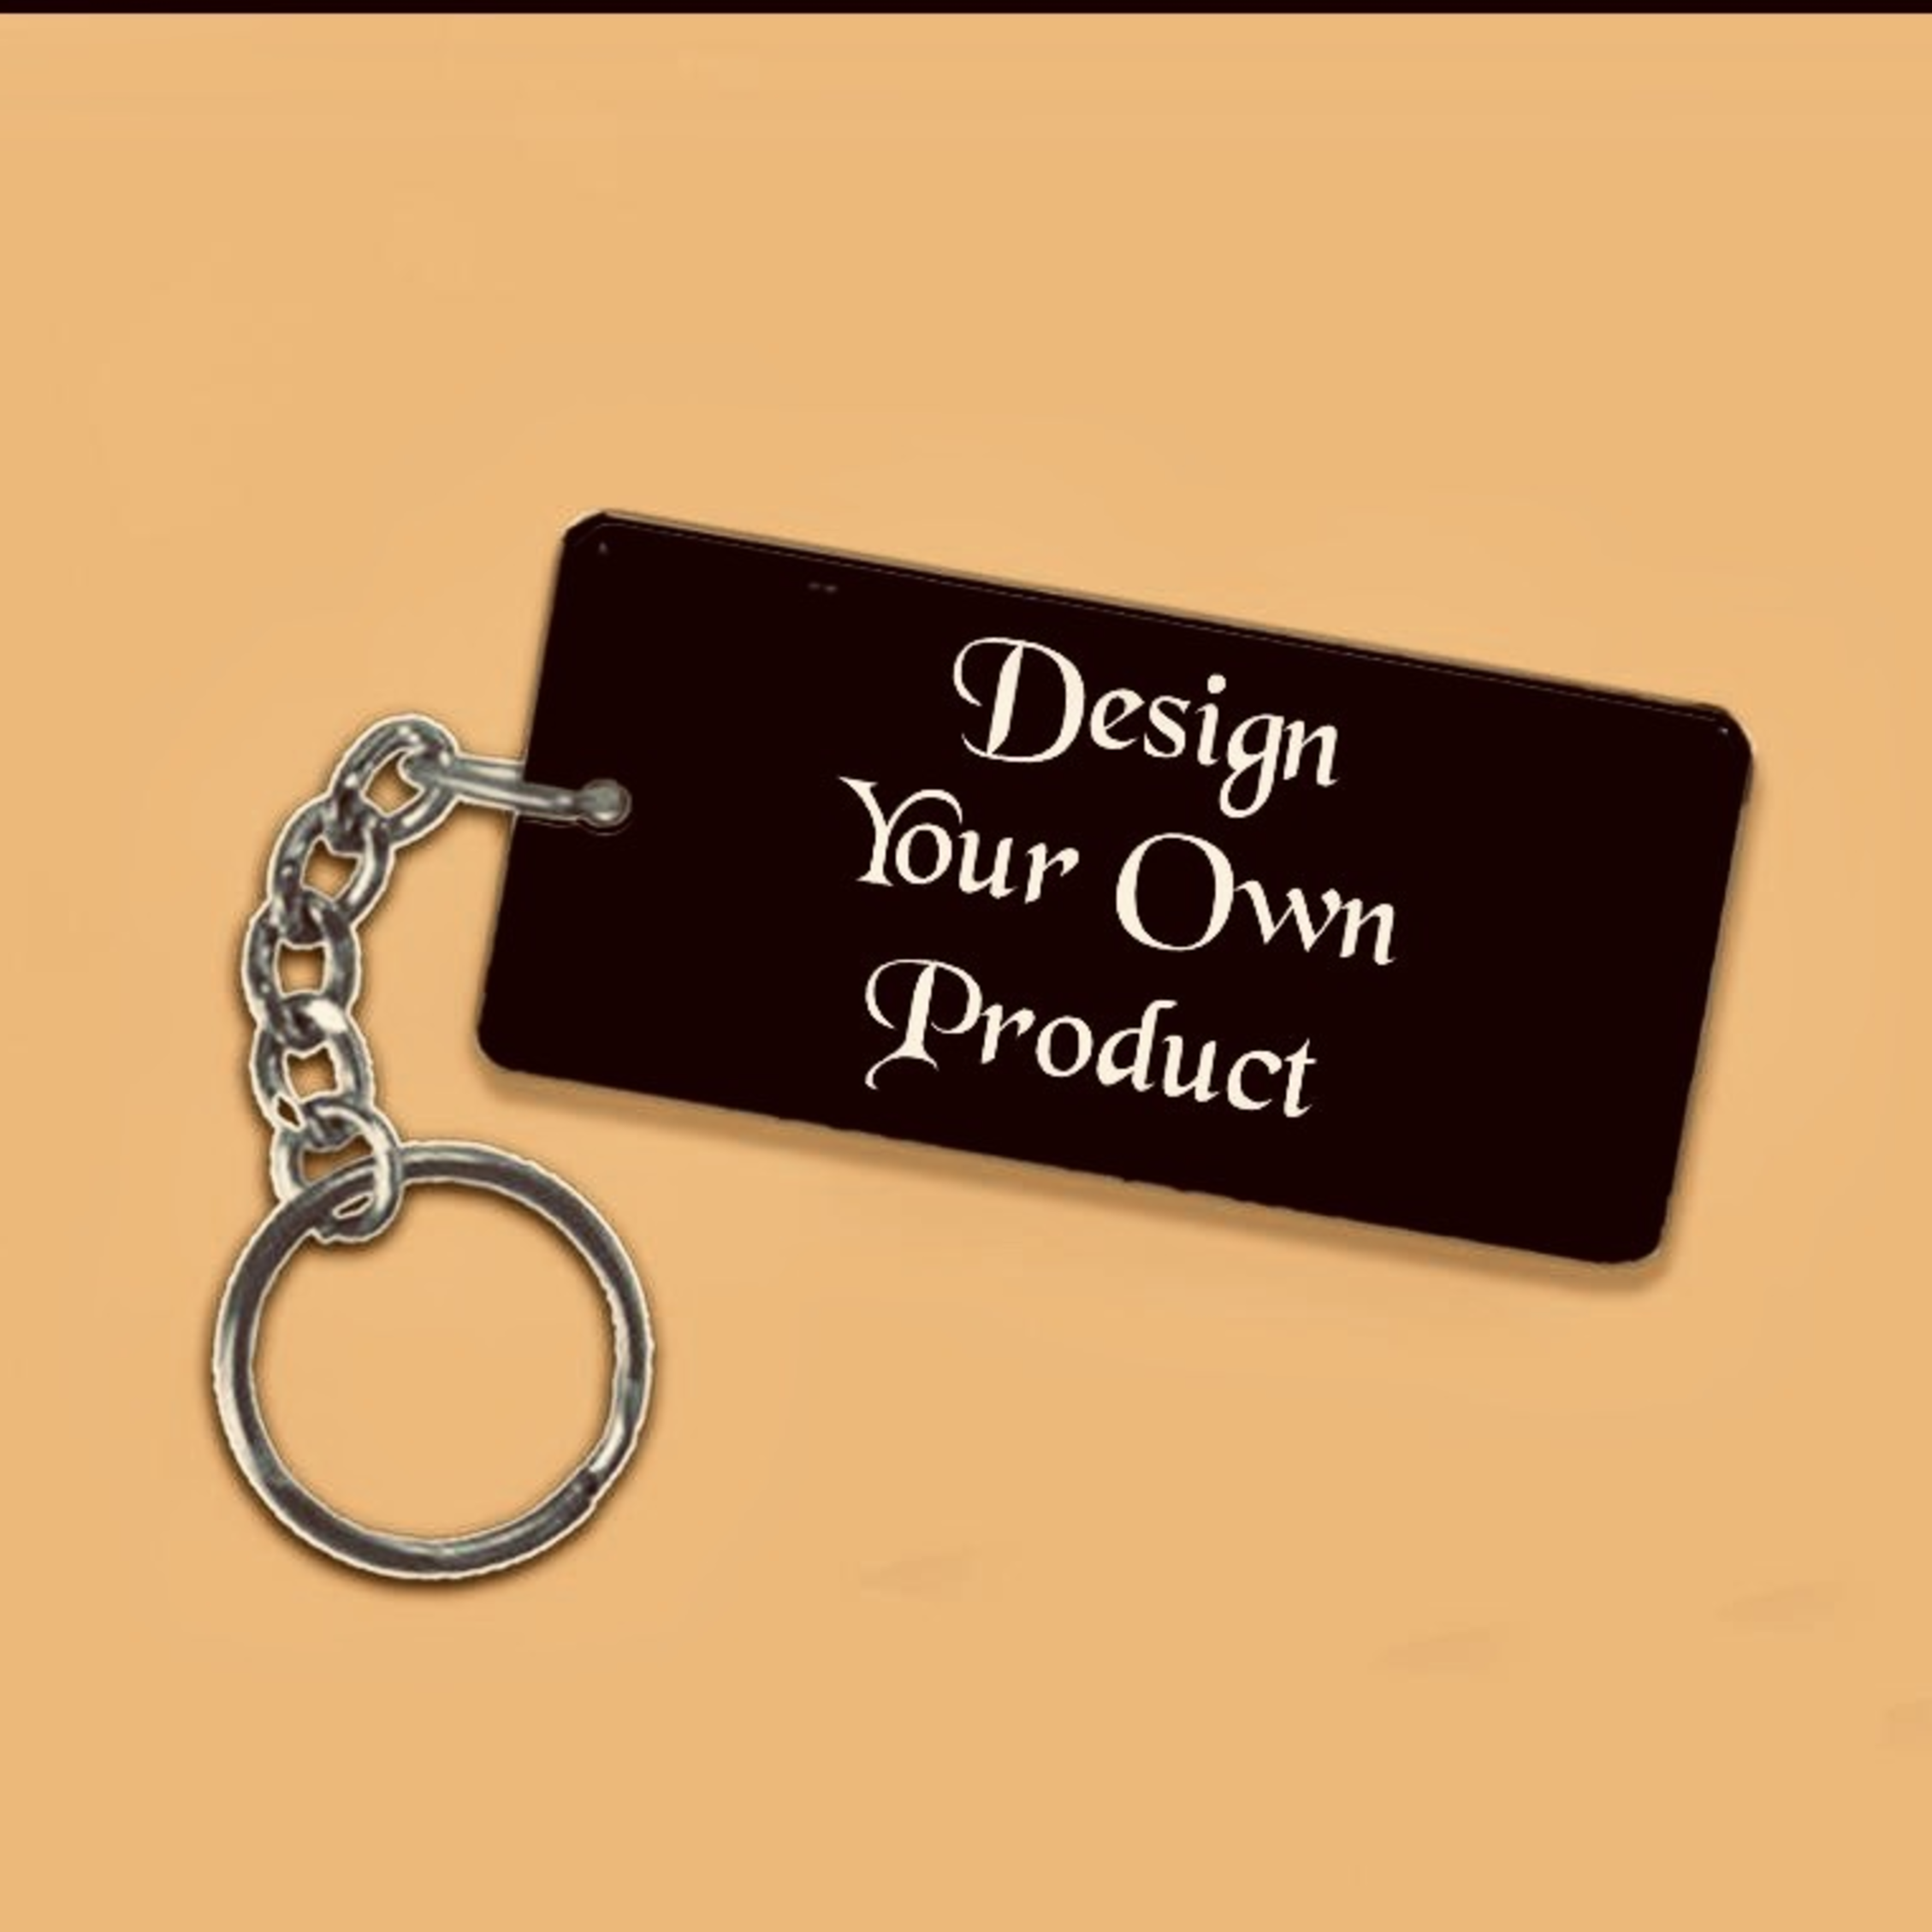 Metal Key-Chains - Customize your own design